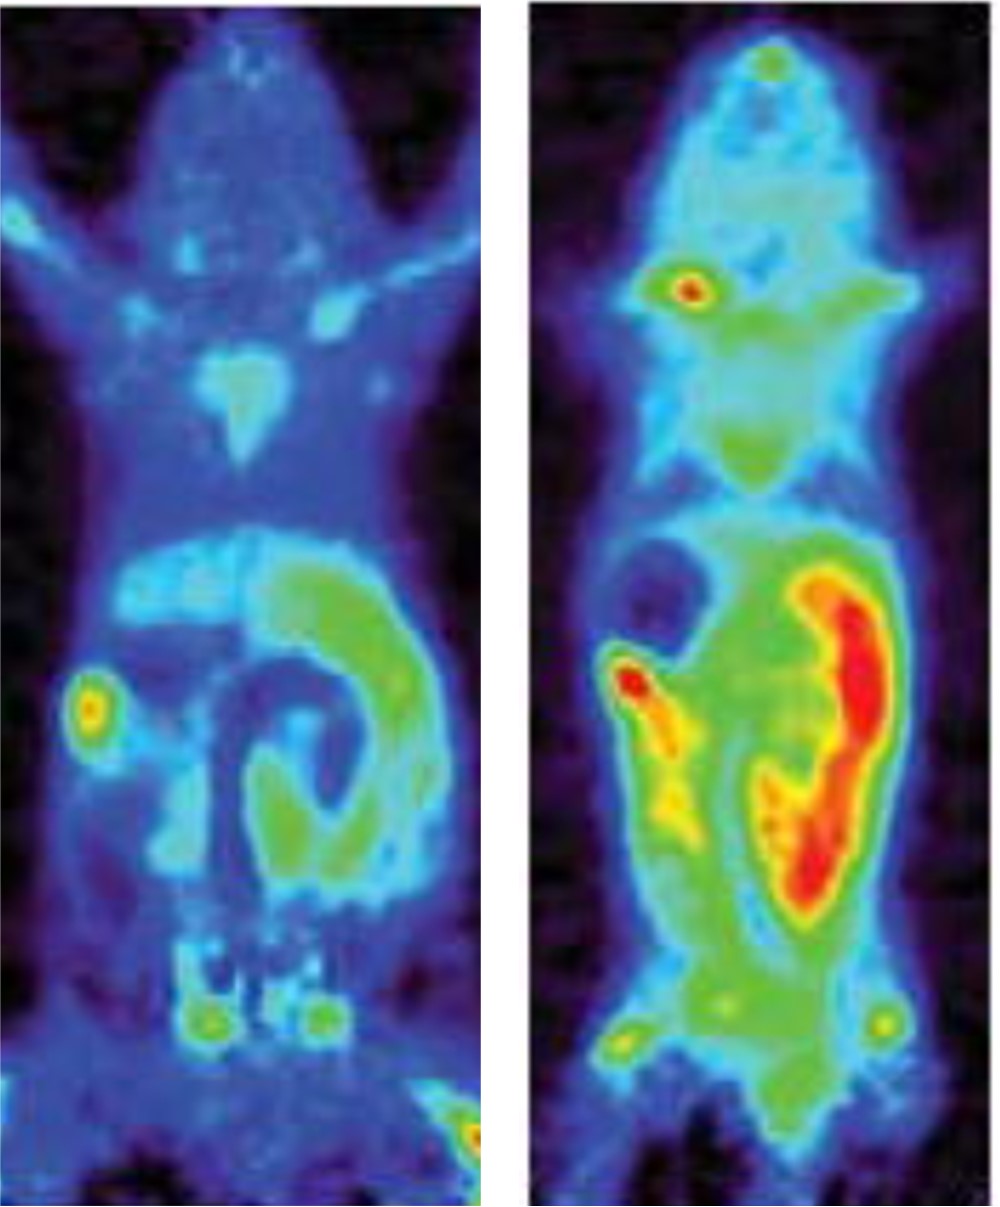 PET scan images showing presence of target enzyme dCK in a normal mouse (left), and one with Crohn’s disease (right).